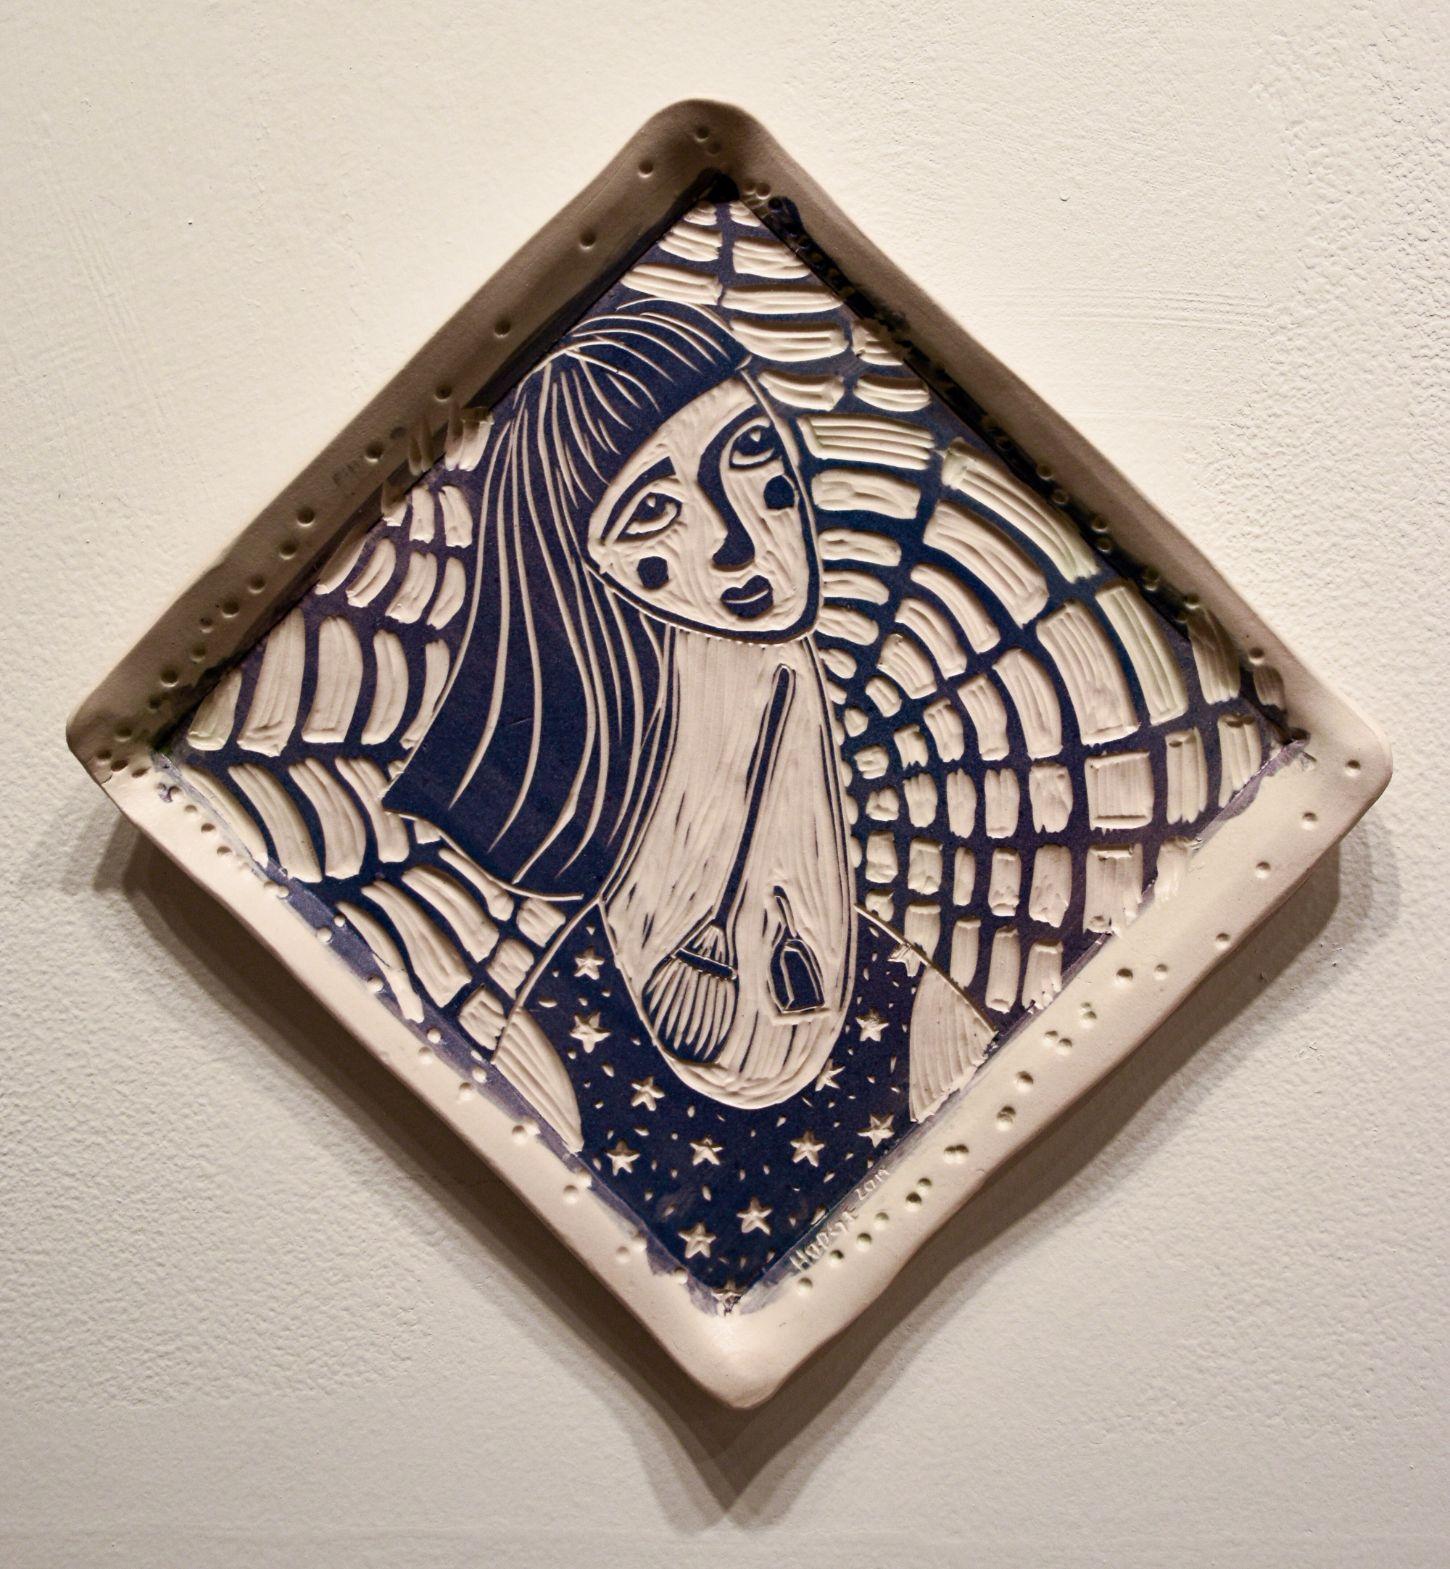 Optional Omniscience, 2019 by Alex Hodge
Carved porcelain
Height: 10 in x Width: 10 in x Depth: 0.5 in 
Unique

Her poetic porcelain plates examine and reimagine the history of art in a way that values women, not only in body, but in wholeness,